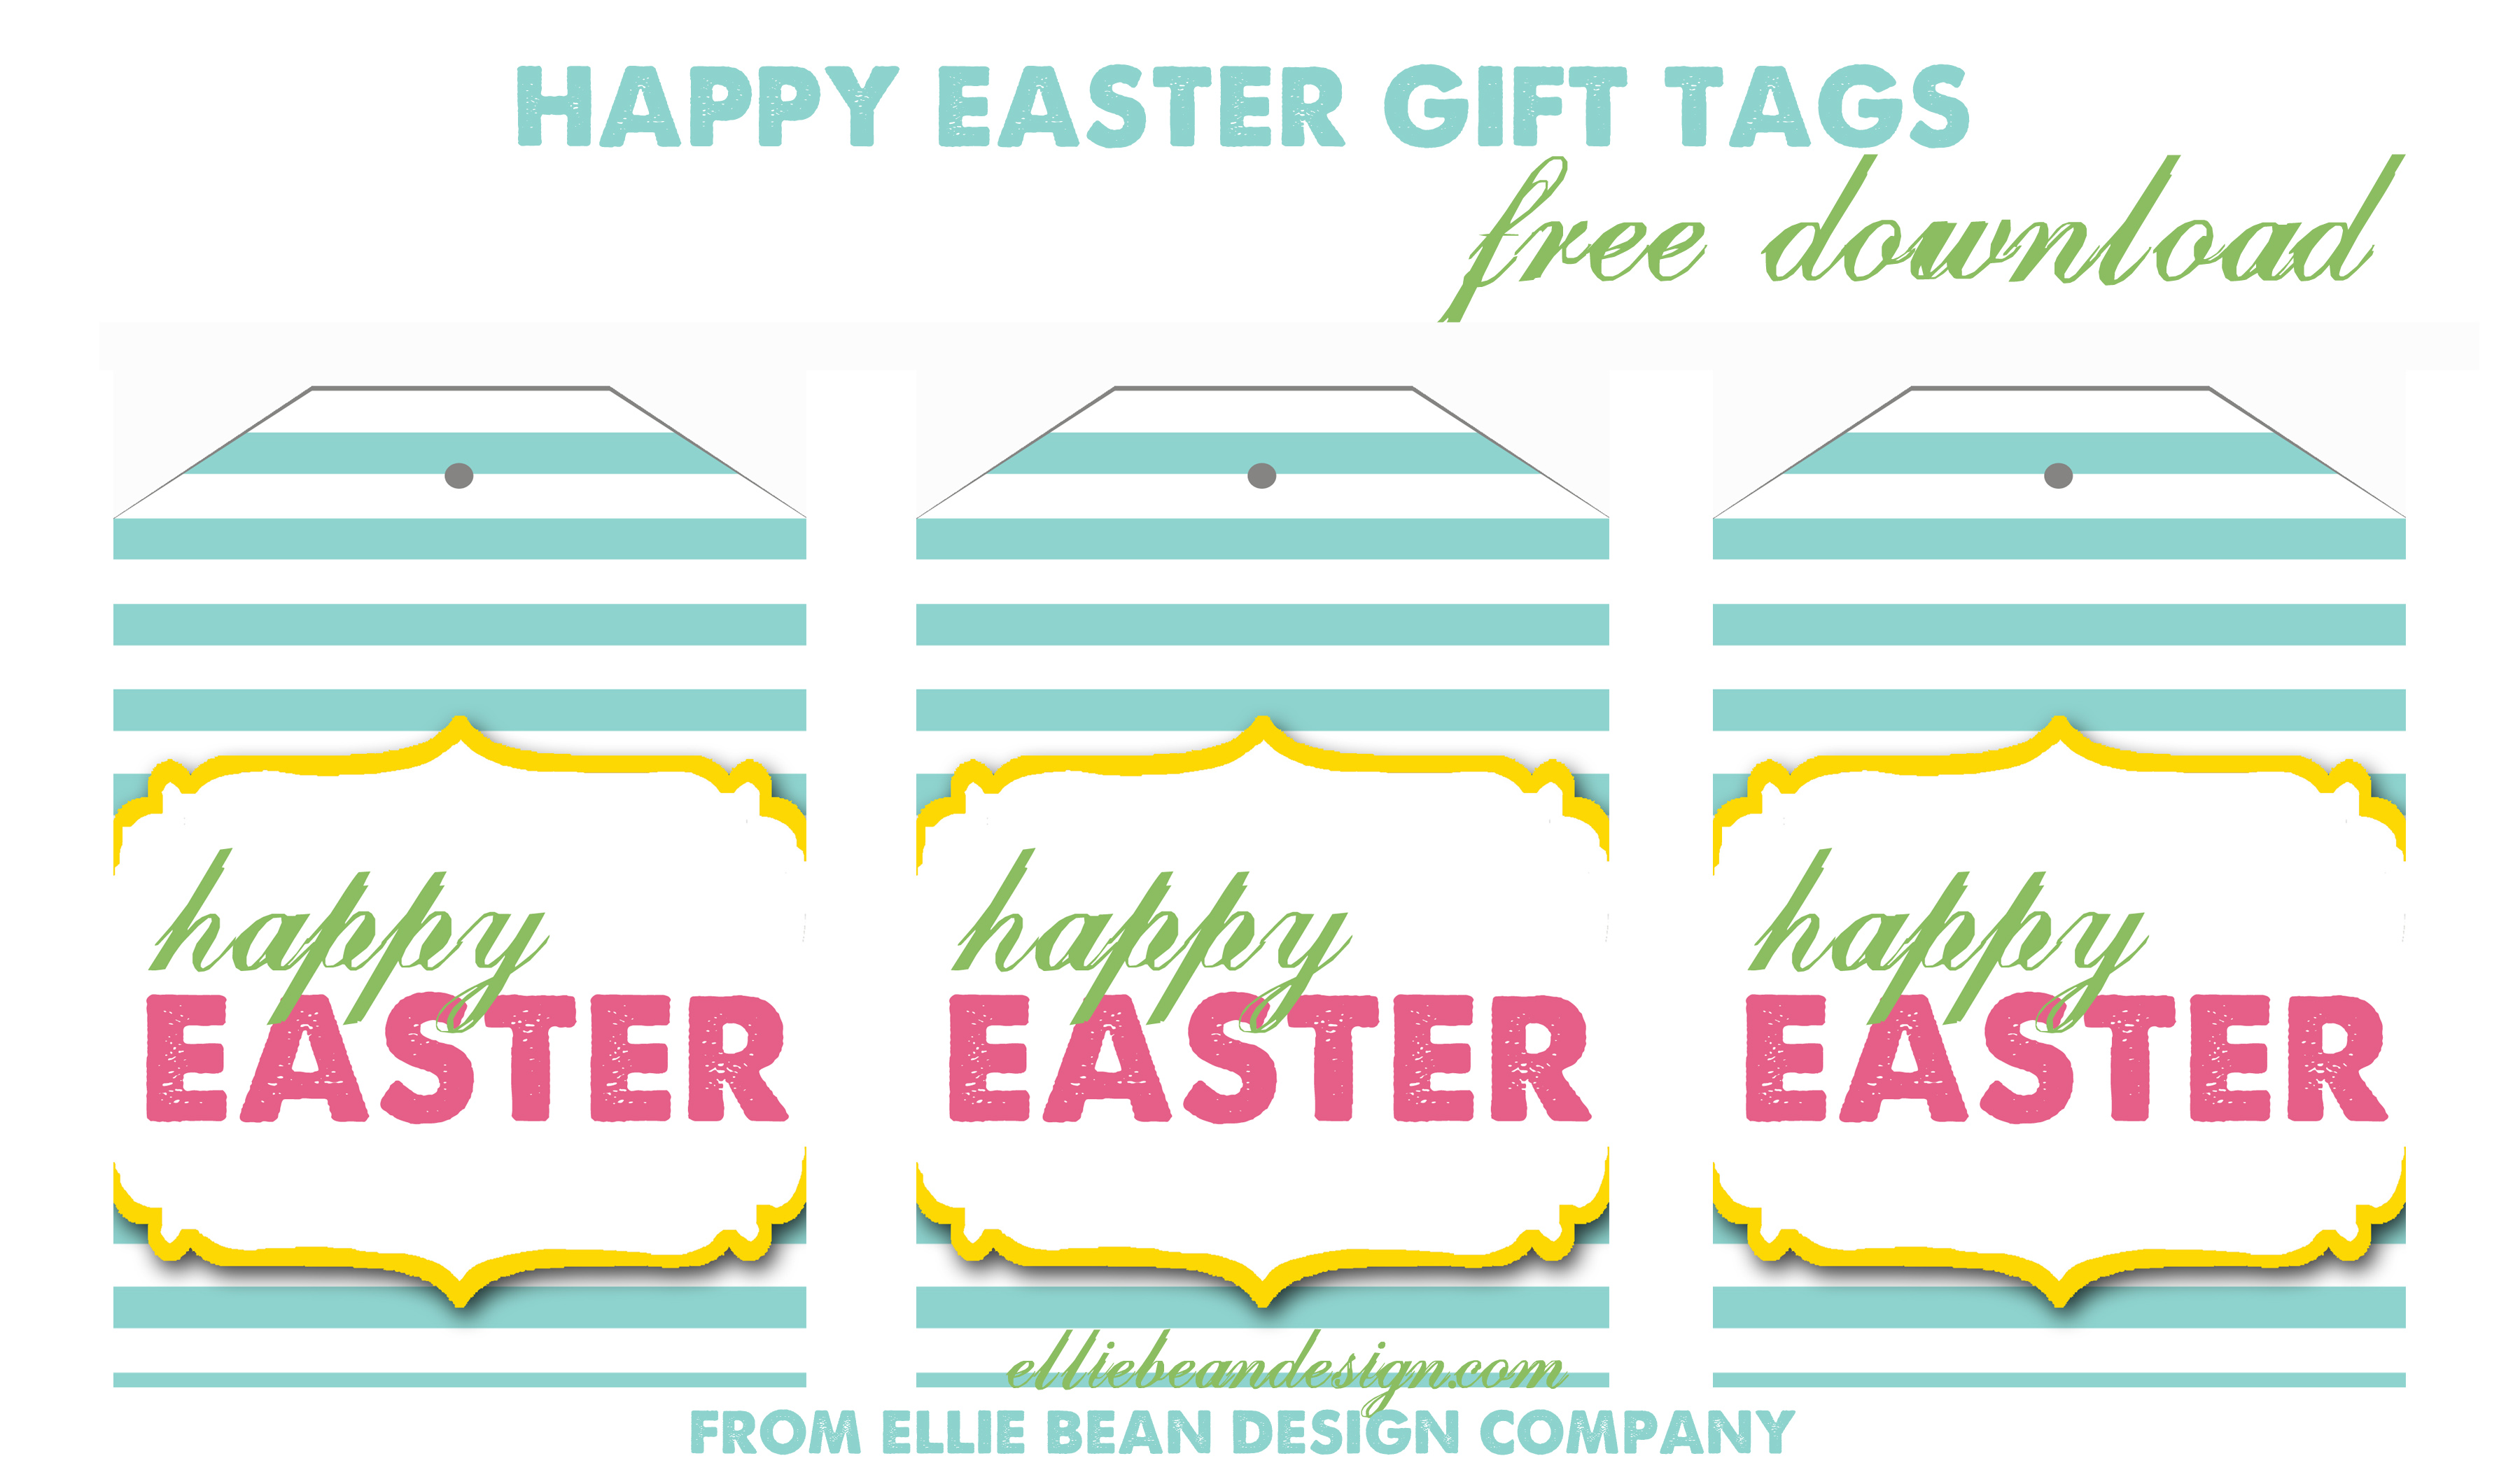 Easter Printable Images Gallery Category Page 1 printablee com